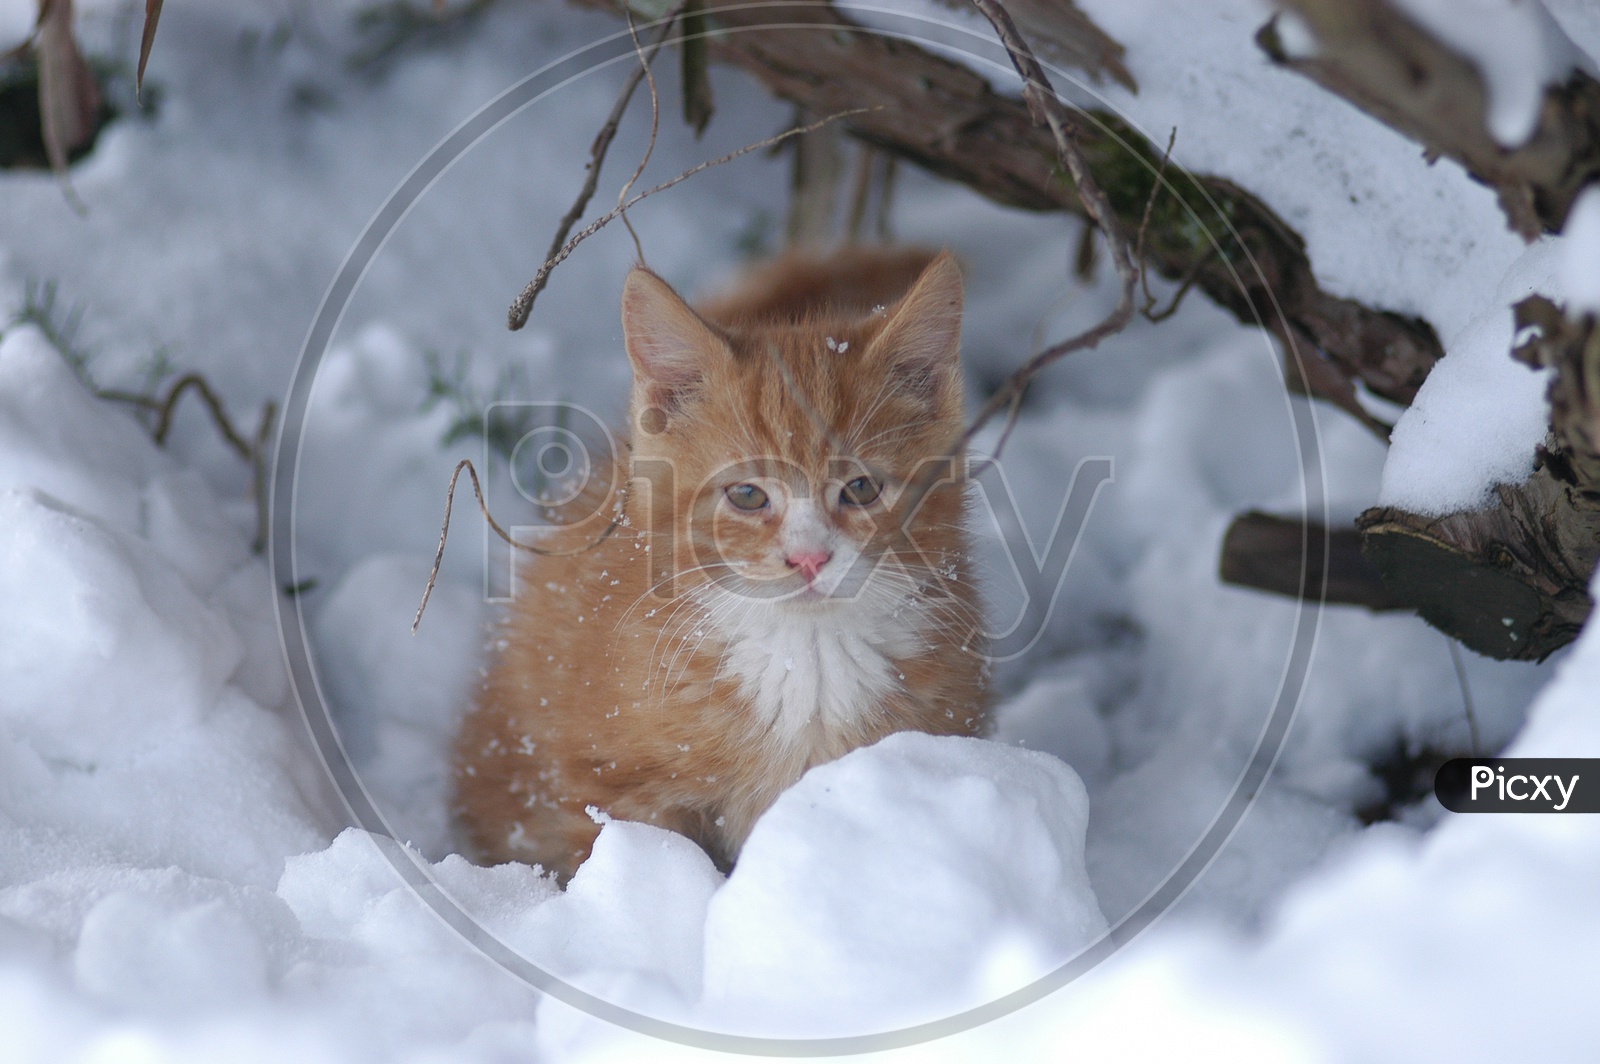 A hossico cat in the snow